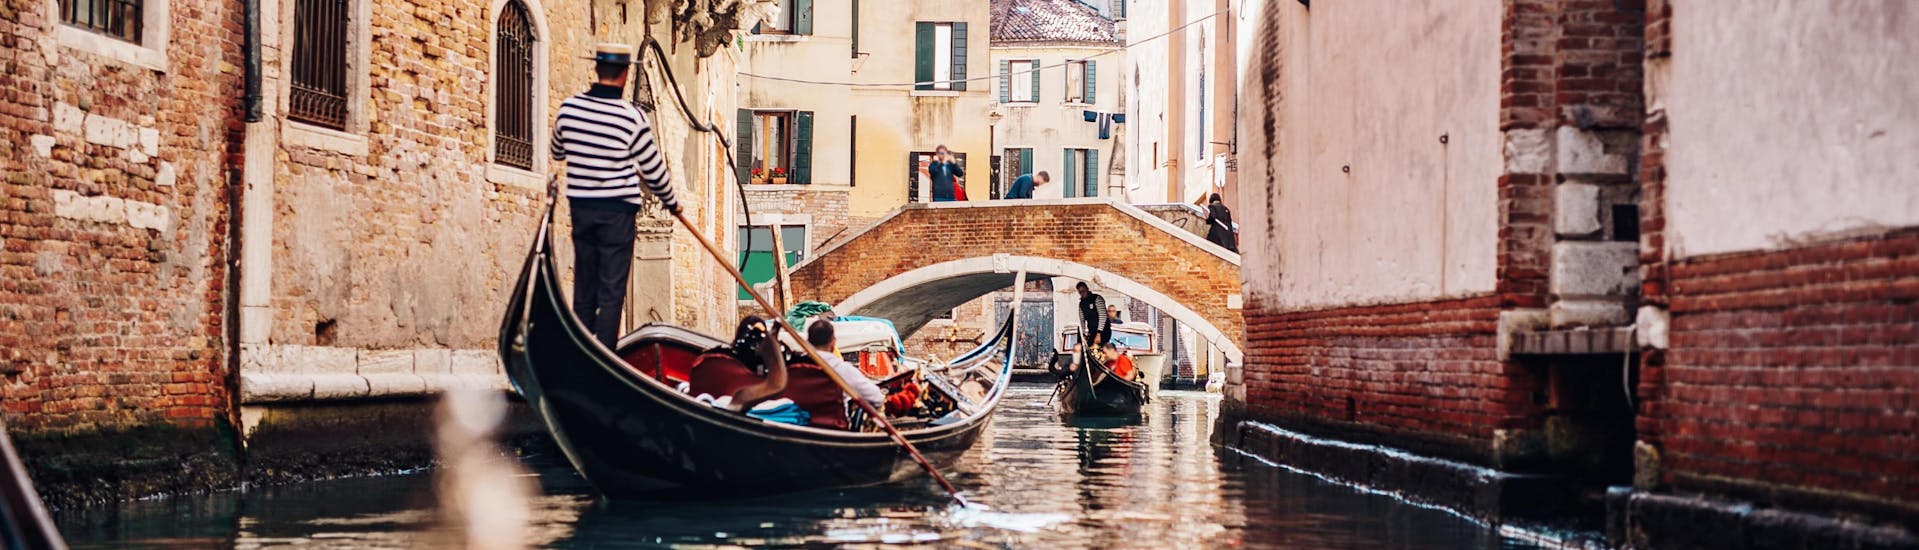 A gondoliere is paddling the boat through a narrow canal on a gondola ride near the Grand Canal in Venice.